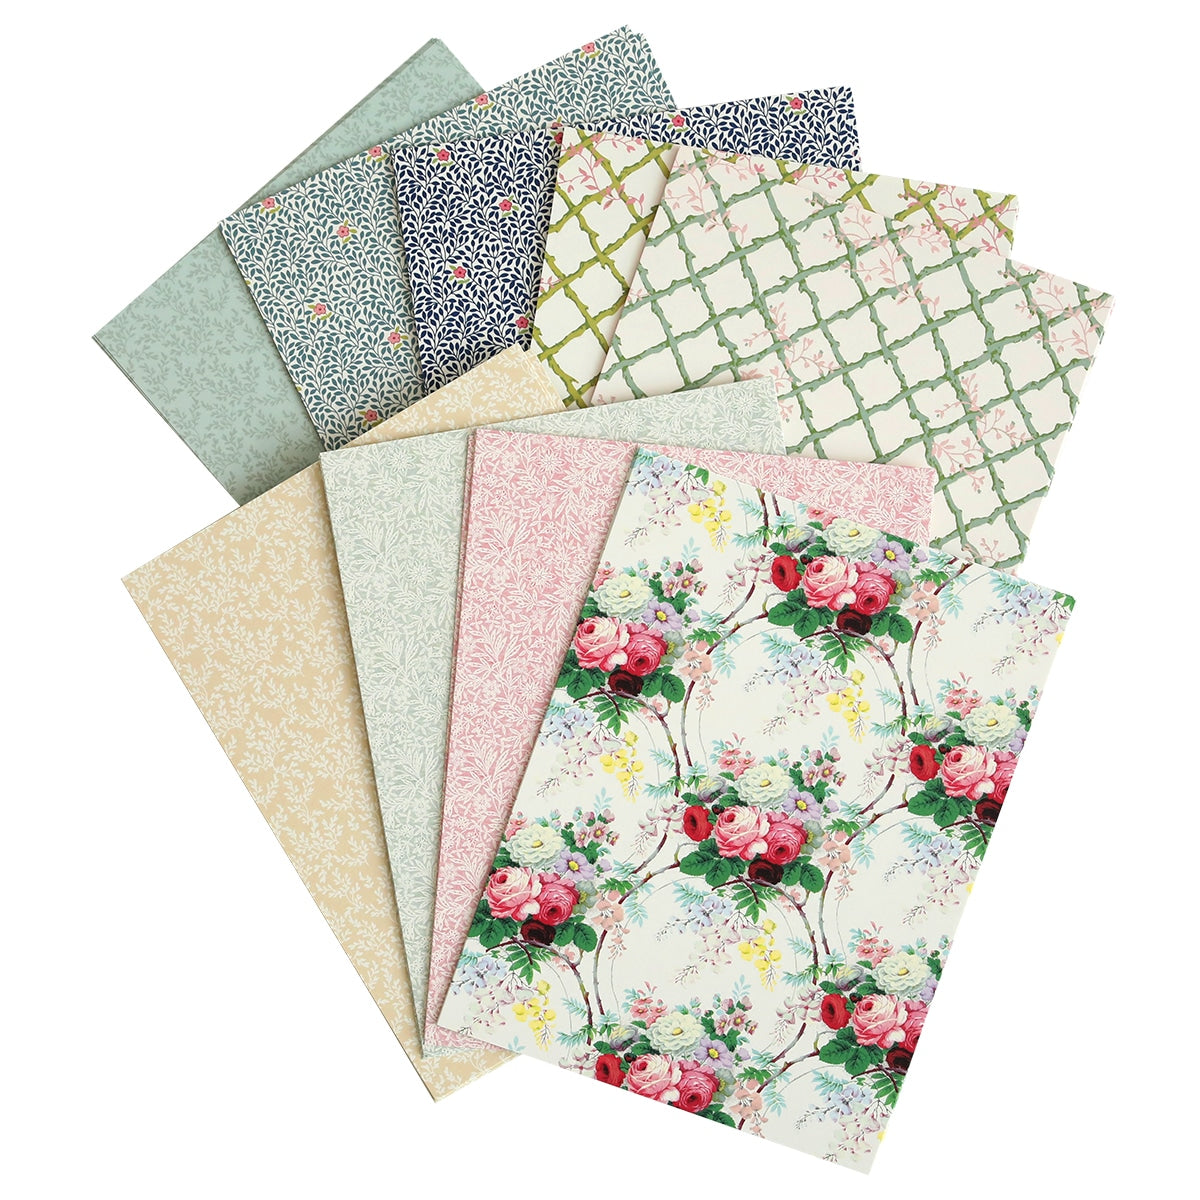 A bunch of Flower Shop Double Sided Cardstock in different colors on a white background.